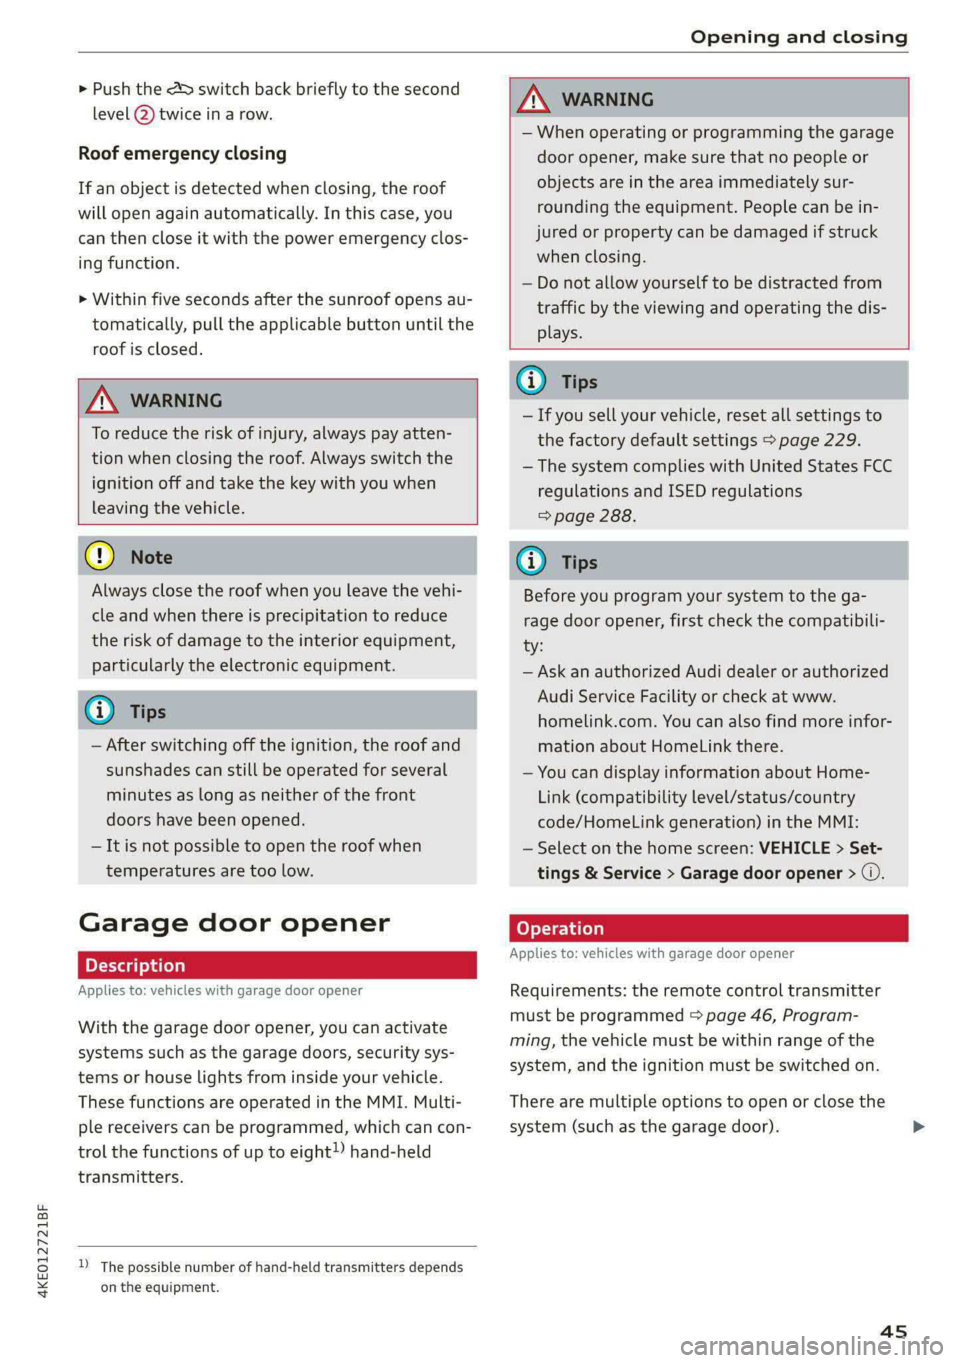 AUDI E-TRON 2021 Service Manual 4KE012721BF 
Opening and closing 
  
> Push the 2S switch back briefly to the second 
level 2) twice in a row. 
Roof emergency closing 
If an object is detected when closing, the roof 
will open again